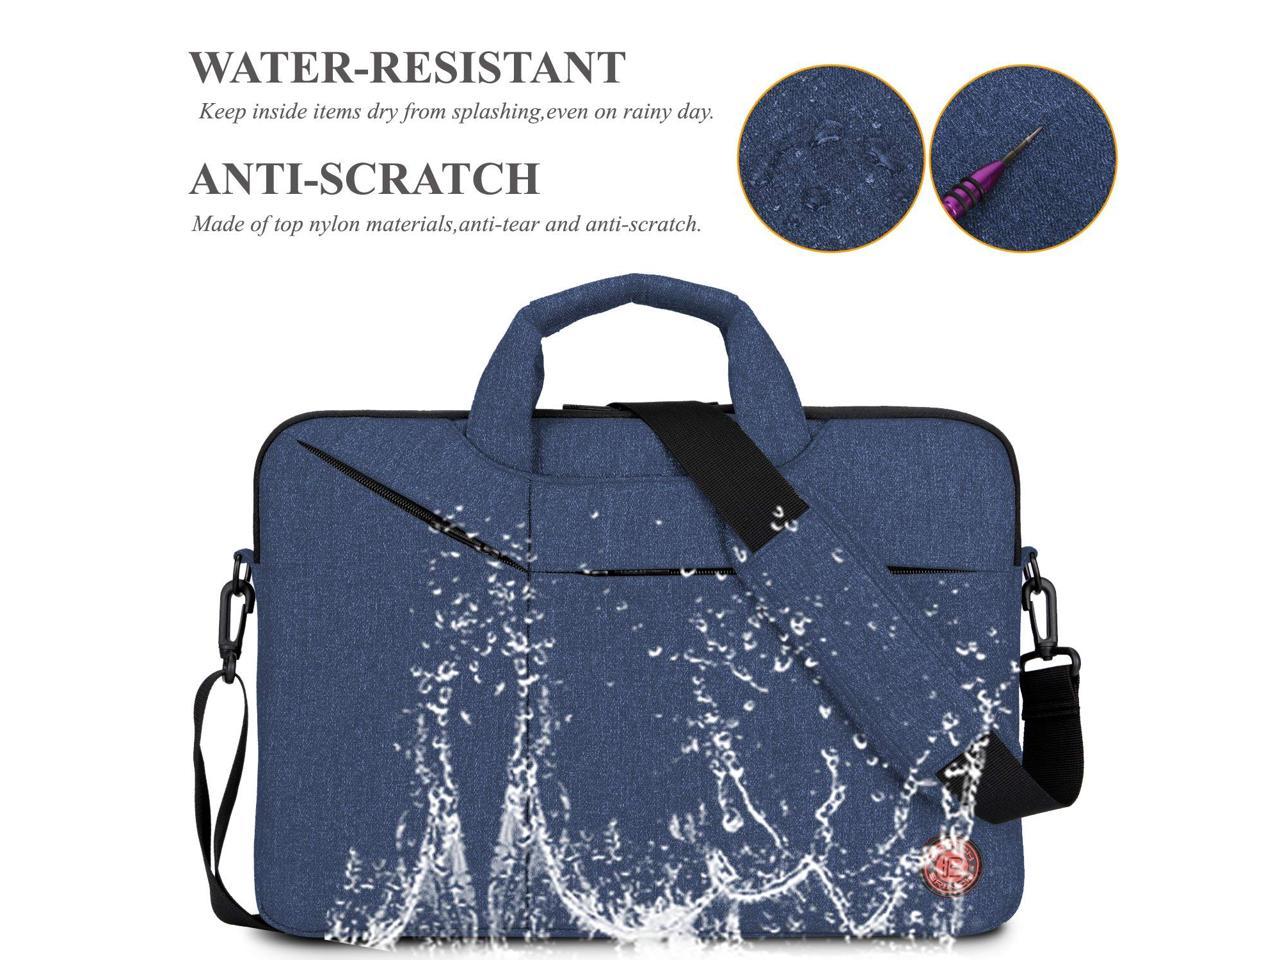 iCasso 15-15.6 inch Laptop Sleeve Water Resistant & Shock Resistant Super Protection Laptop Bag for Macbook Pro15 /New Pro 15/Notebook/Chromebook/Ultrabook PC